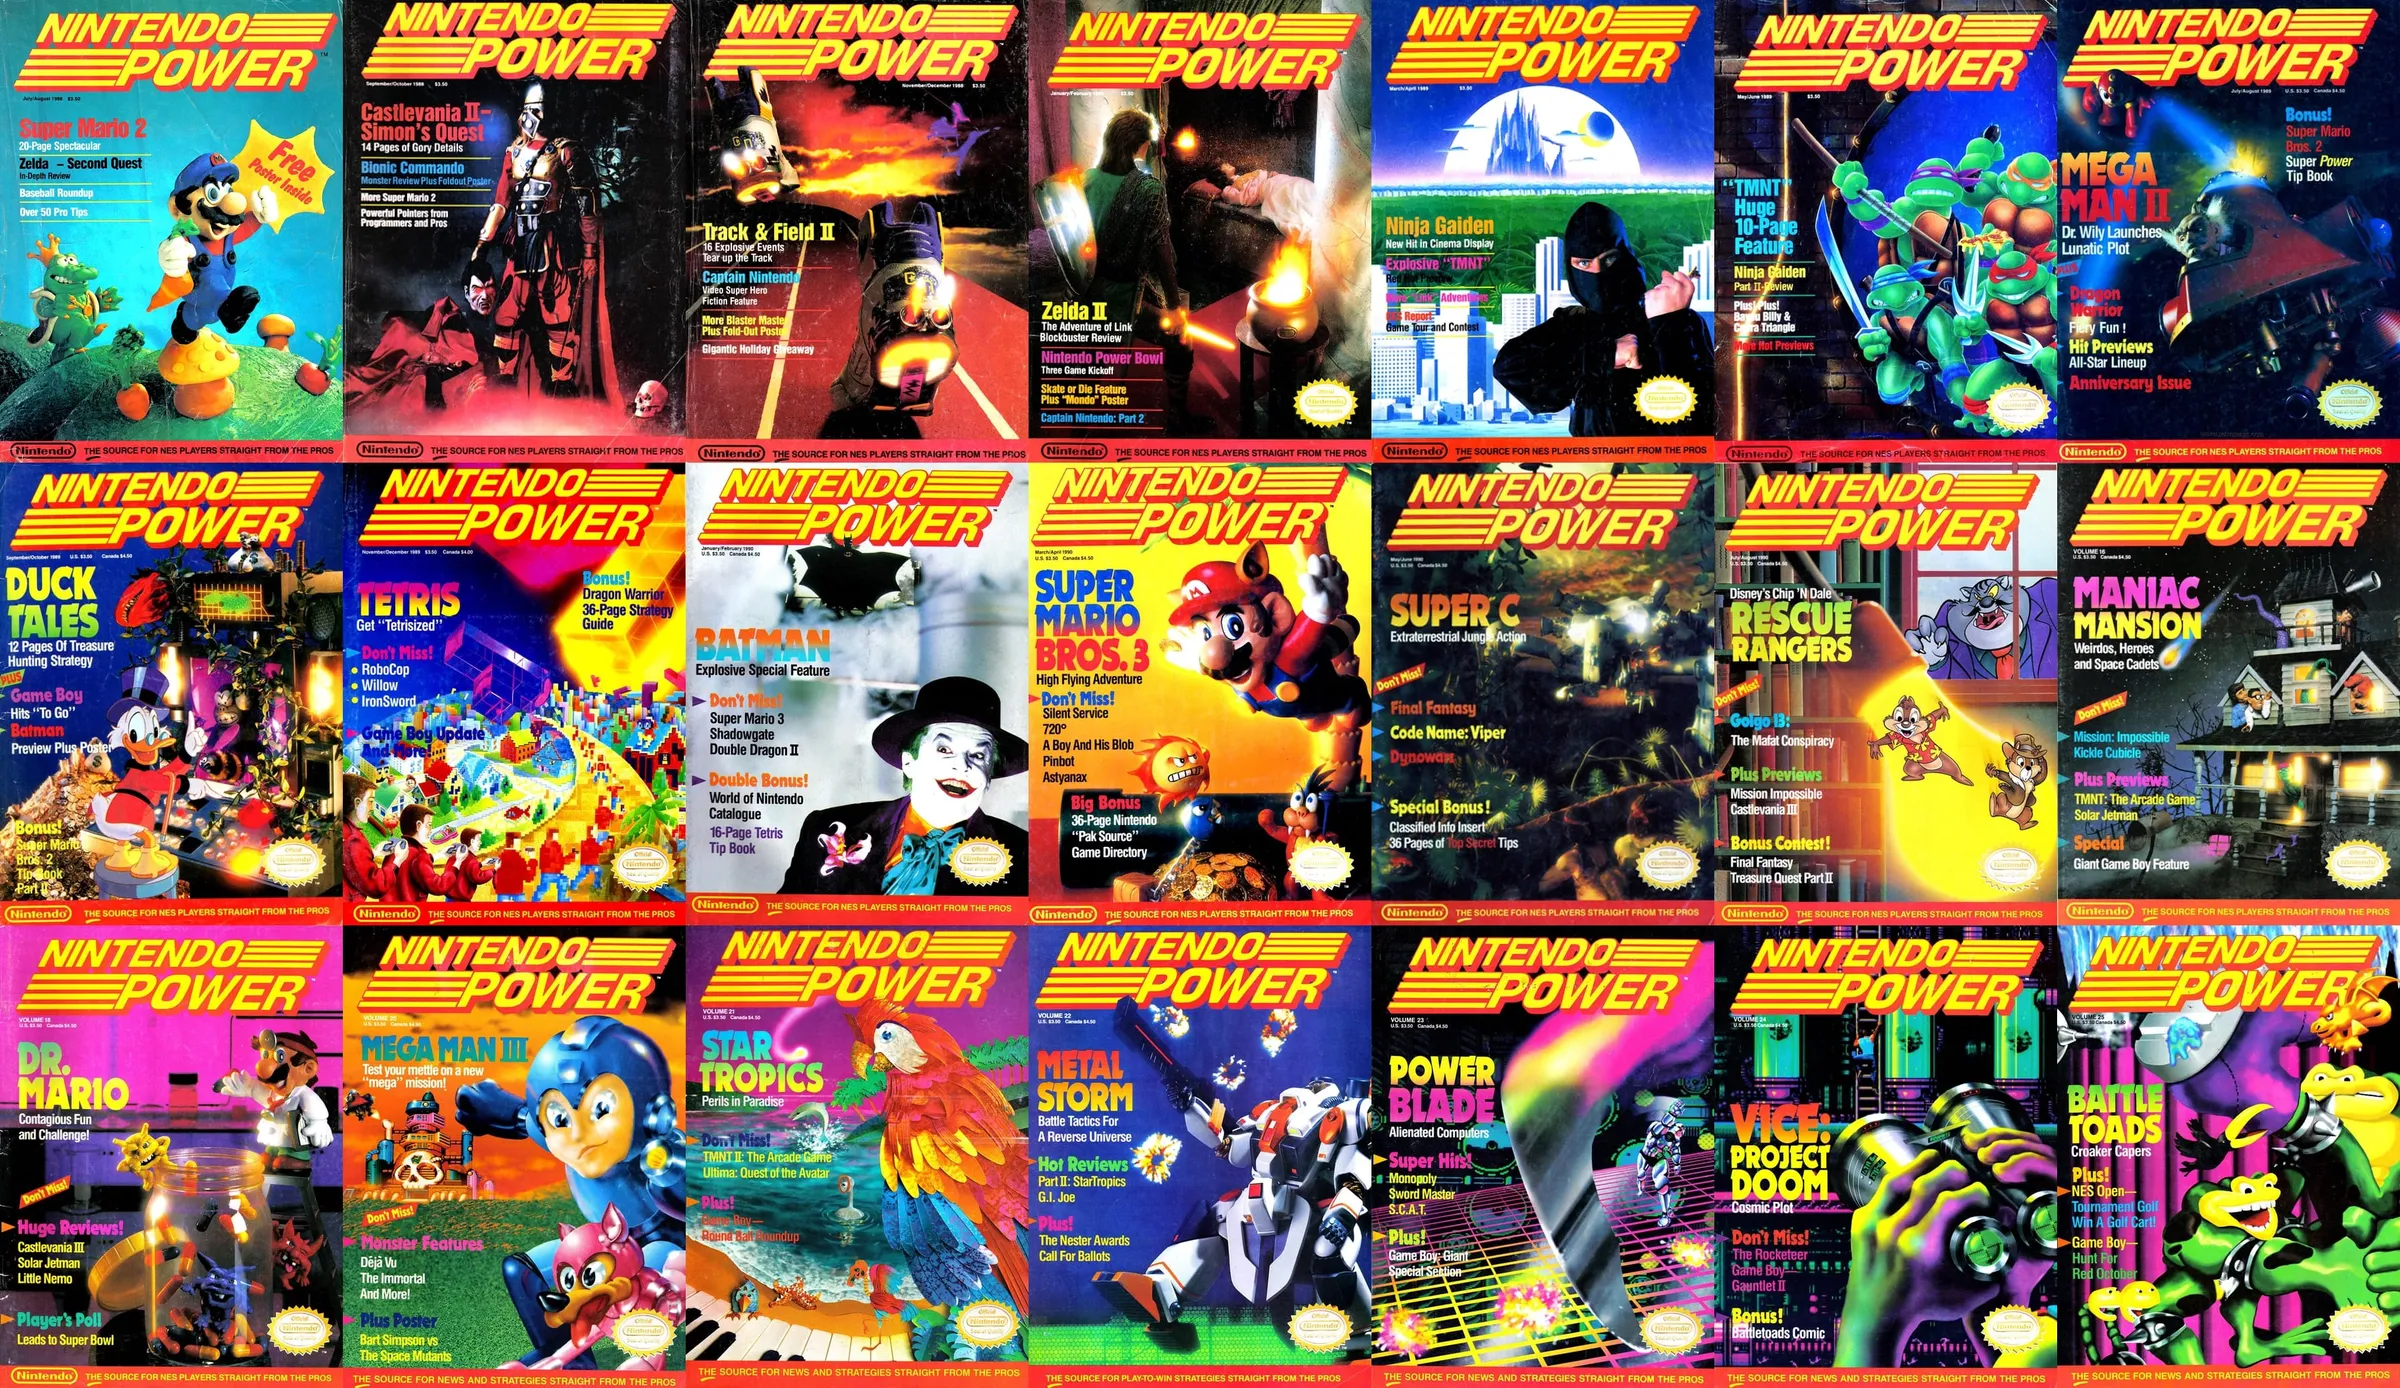 Collection of classic Nintendo Power covers